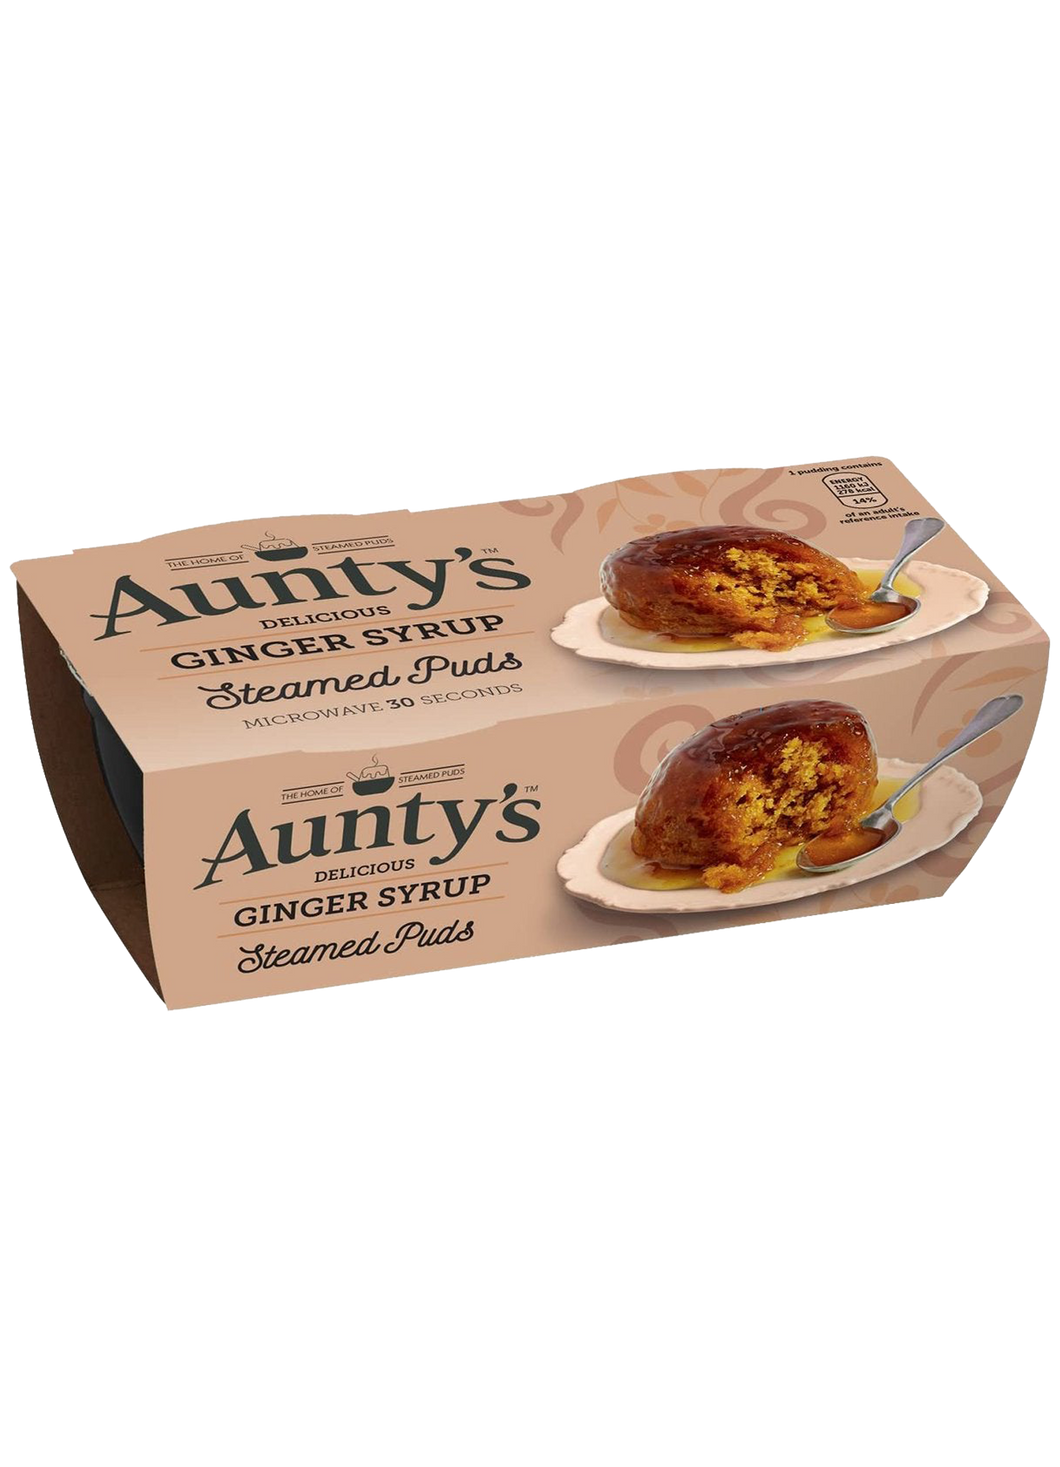 Aunty's Ginger Syrup Steamed Puds (2 Puddings) 190g